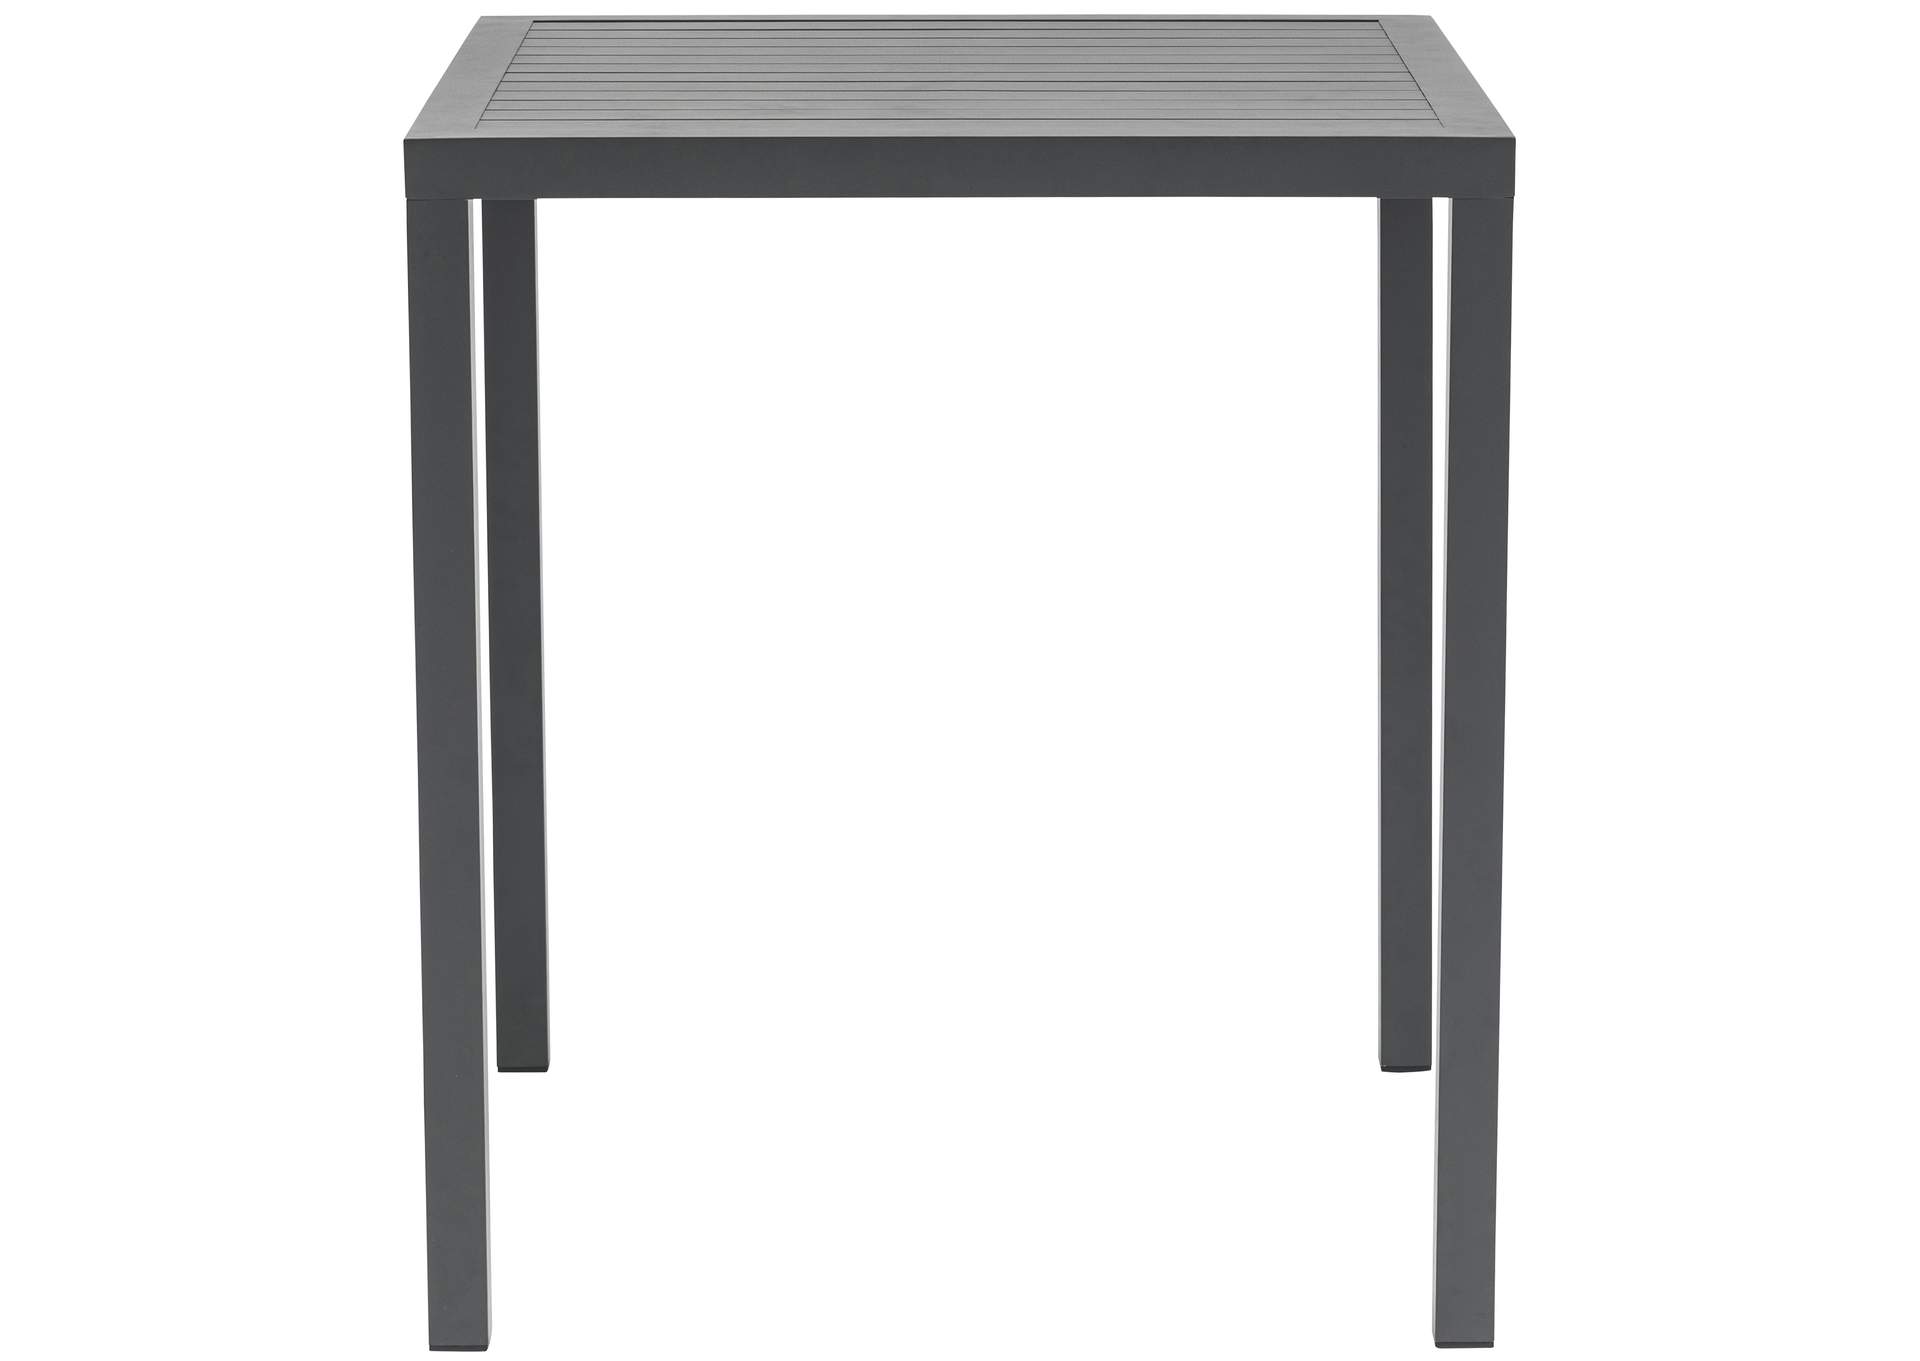 Maldives Outdoor Patio Square Bar Table,Meridian Furniture